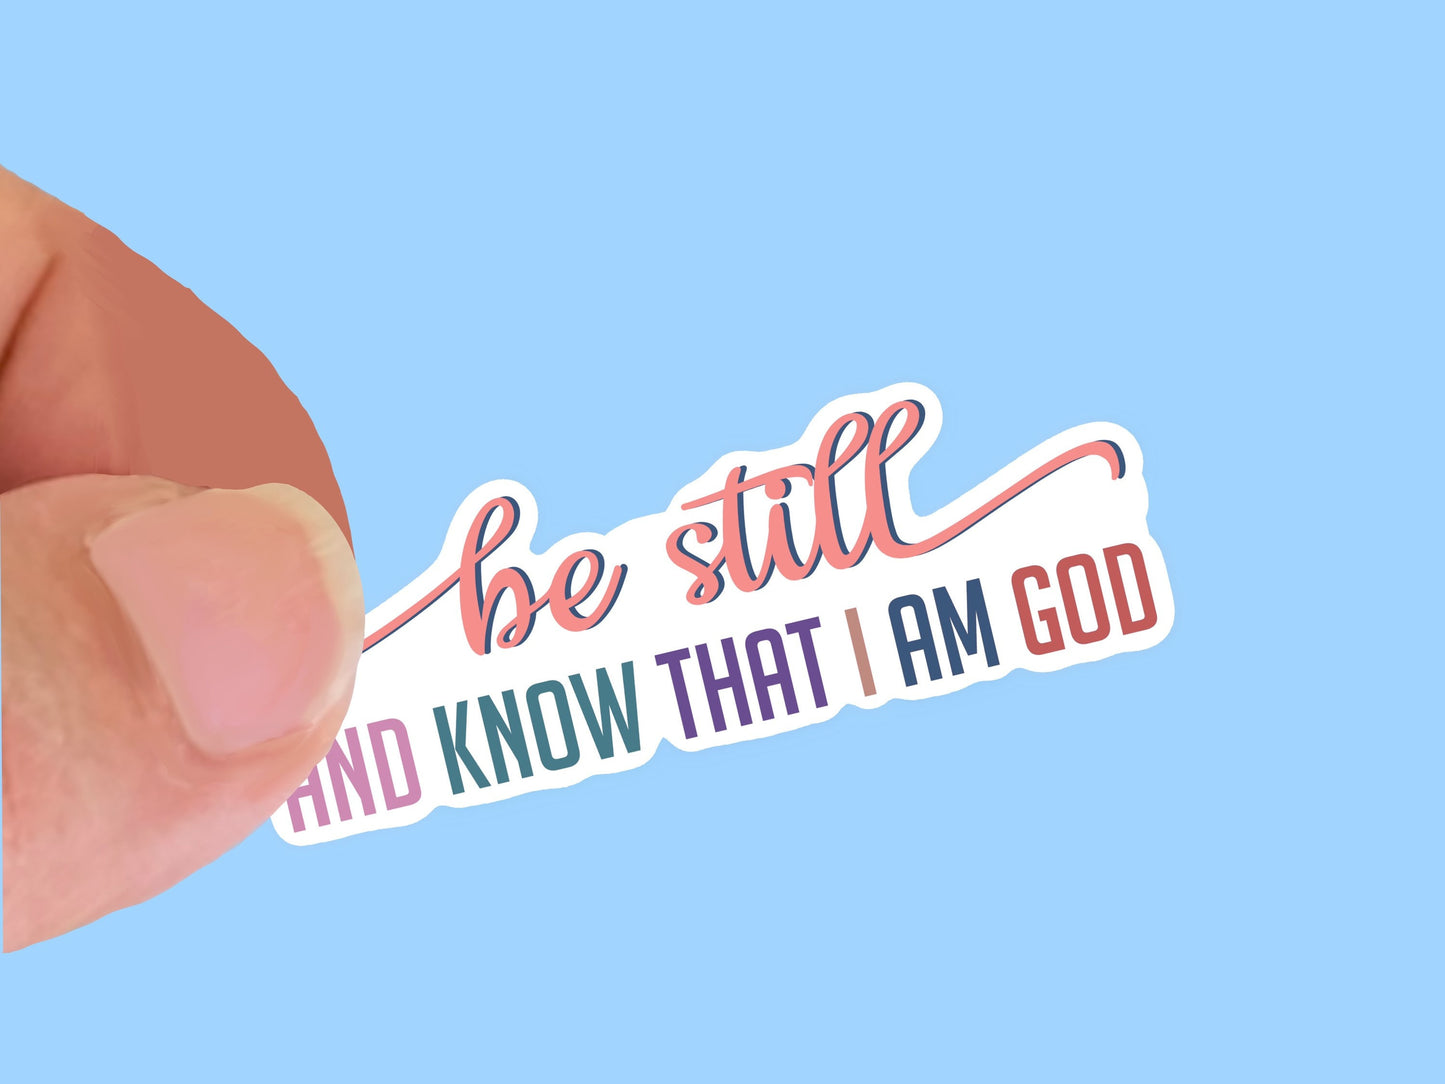 Be Still and Know That I am God, Christian Faith Waterproof Vinyl Sticker/ Decal- Choice of Size